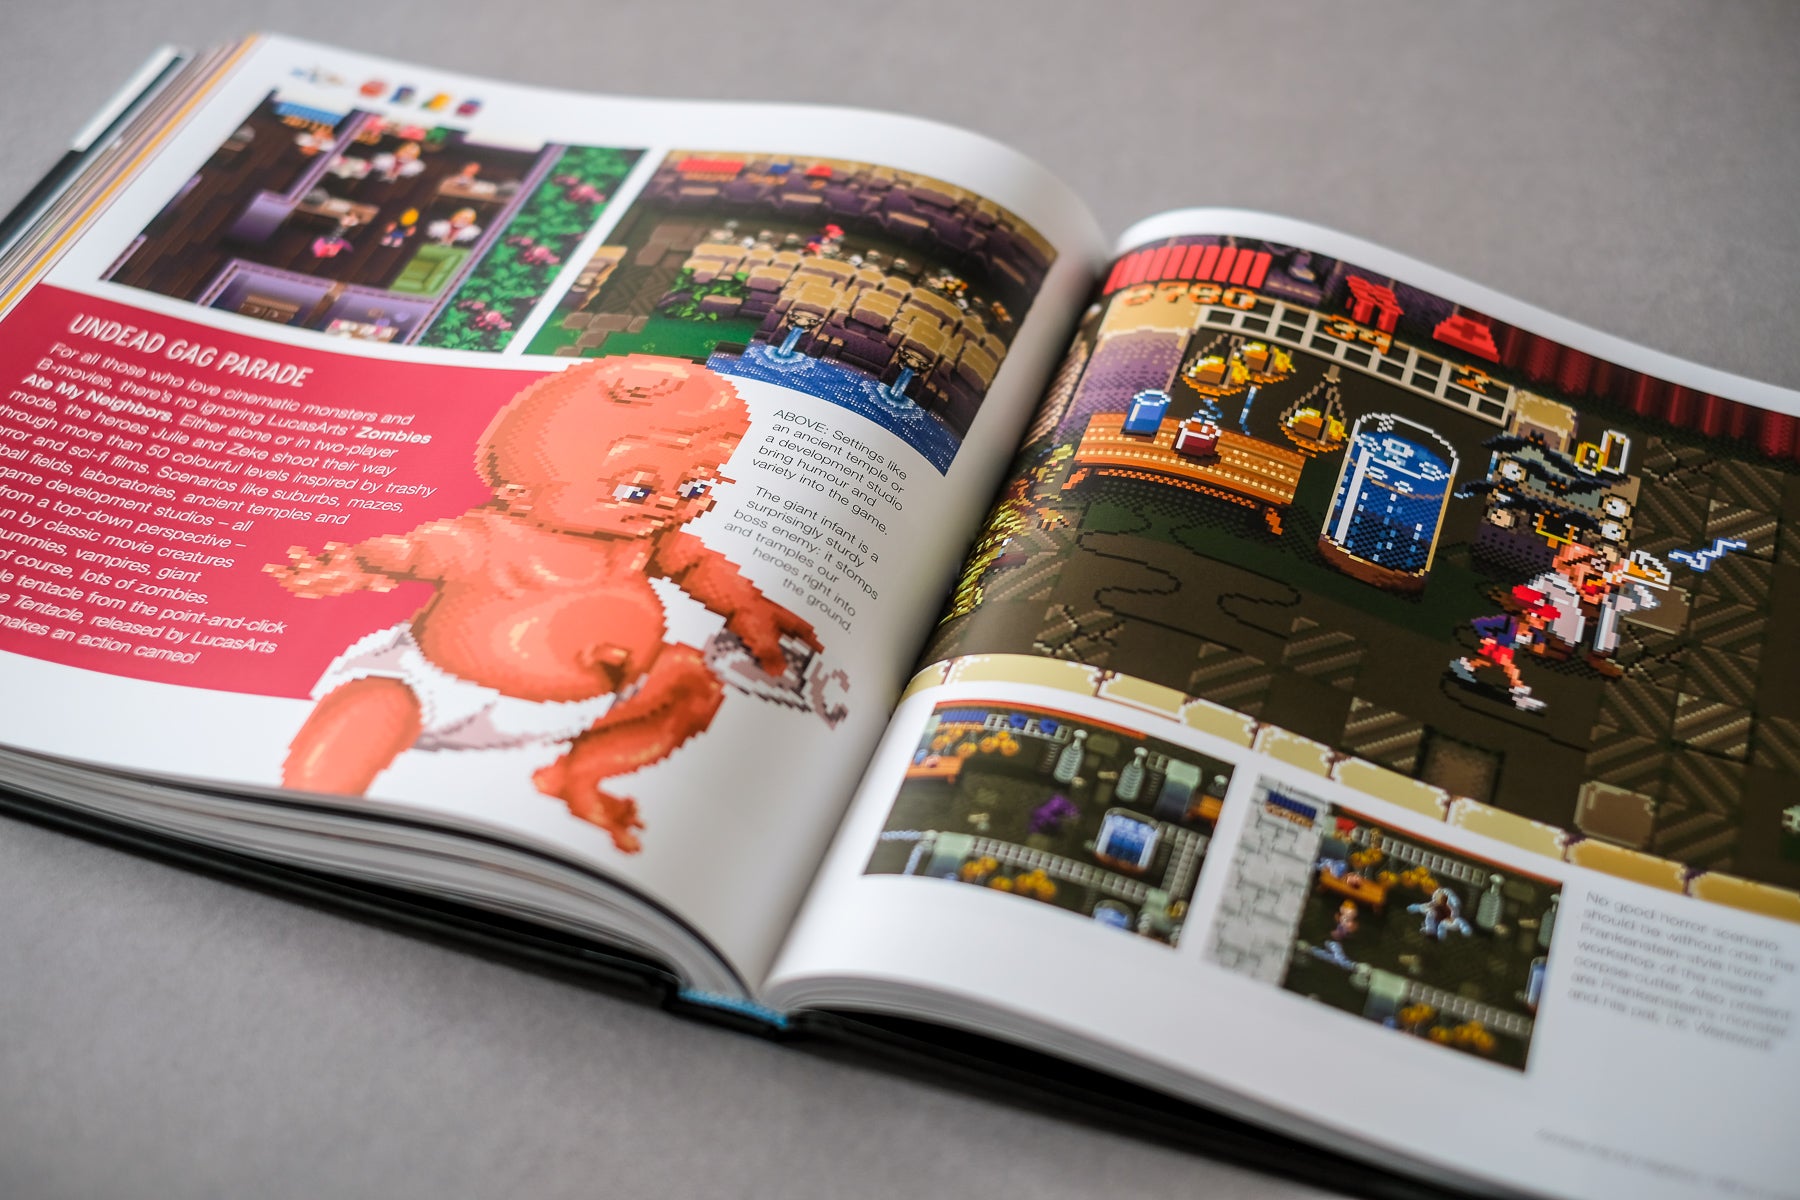 The SNES Pixel Book - Game art from Nintendo's console